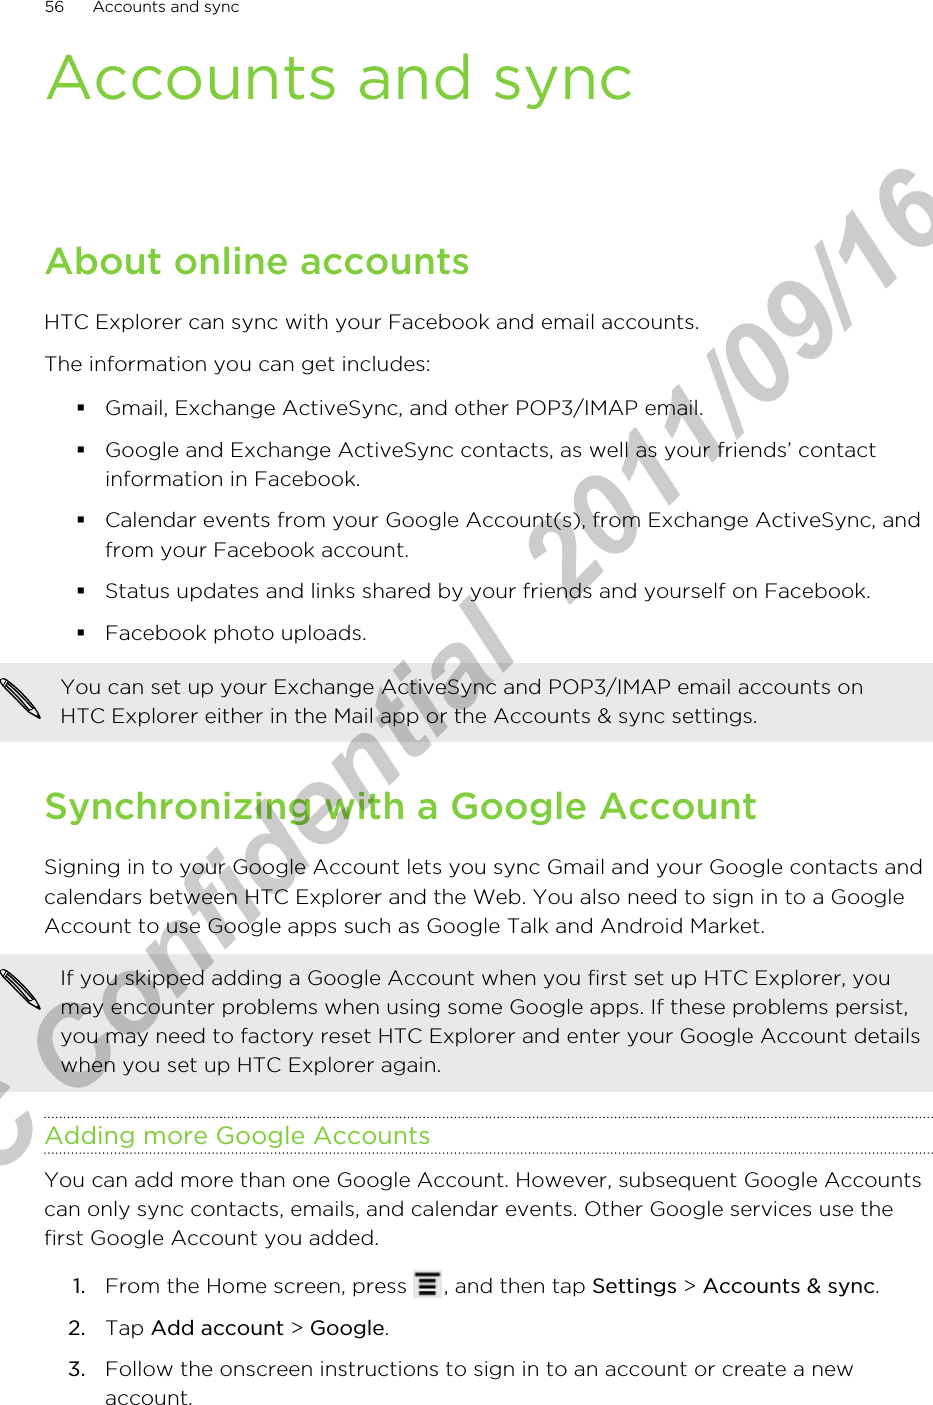 Accounts and syncAbout online accountsHTC Explorer can sync with your Facebook and email accounts.The information you can get includes:§Gmail, Exchange ActiveSync, and other POP3/IMAP email.§Google and Exchange ActiveSync contacts, as well as your friends’ contactinformation in Facebook.§Calendar events from your Google Account(s), from Exchange ActiveSync, andfrom your Facebook account.§Status updates and links shared by your friends and yourself on Facebook.§Facebook photo uploads.You can set up your Exchange ActiveSync and POP3/IMAP email accounts onHTC Explorer either in the Mail app or the Accounts &amp; sync settings.Synchronizing with a Google AccountSigning in to your Google Account lets you sync Gmail and your Google contacts andcalendars between HTC Explorer and the Web. You also need to sign in to a GoogleAccount to use Google apps such as Google Talk and Android Market.If you skipped adding a Google Account when you first set up HTC Explorer, youmay encounter problems when using some Google apps. If these problems persist,you may need to factory reset HTC Explorer and enter your Google Account detailswhen you set up HTC Explorer again.Adding more Google AccountsYou can add more than one Google Account. However, subsequent Google Accountscan only sync contacts, emails, and calendar events. Other Google services use thefirst Google Account you added.1. From the Home screen, press  , and then tap Settings &gt; Accounts &amp; sync.2. Tap Add account &gt; Google.3. Follow the onscreen instructions to sign in to an account or create a newaccount.56 Accounts and syncHTC Confidential  2011/09/16 